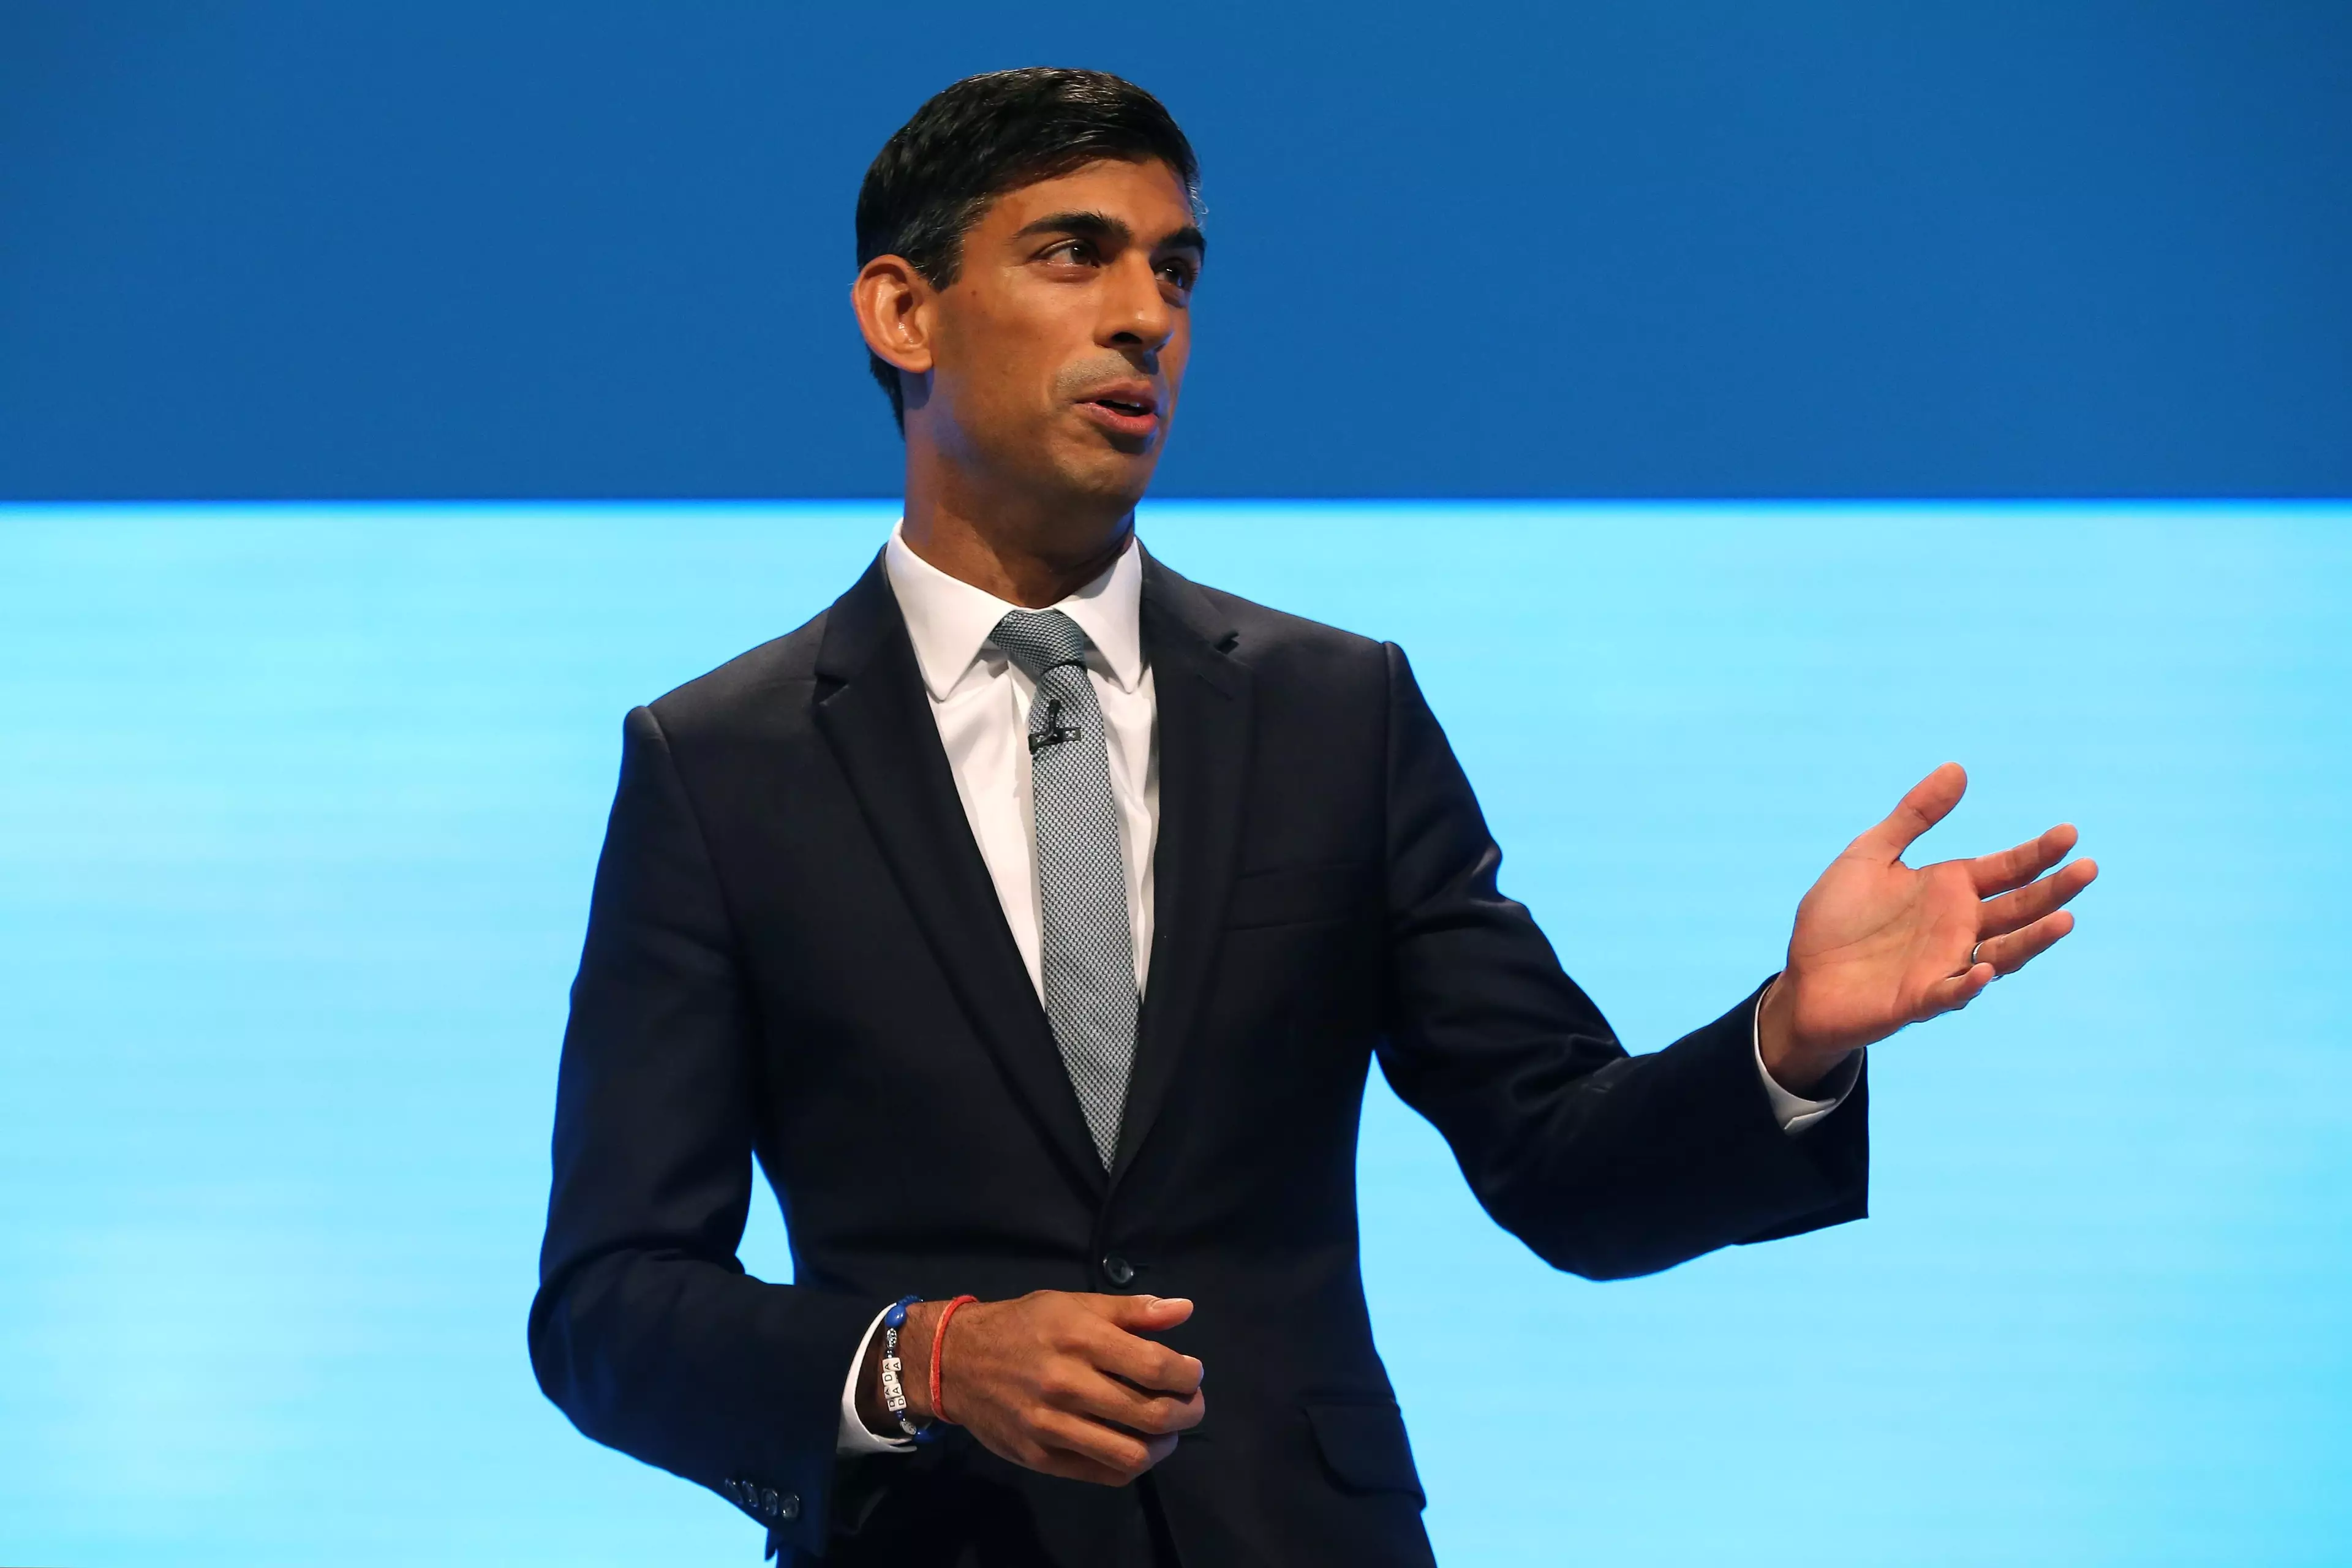 Chancellor Rishi Sunak has been slammed for being 'out-of-touch' amid the energy crisis.